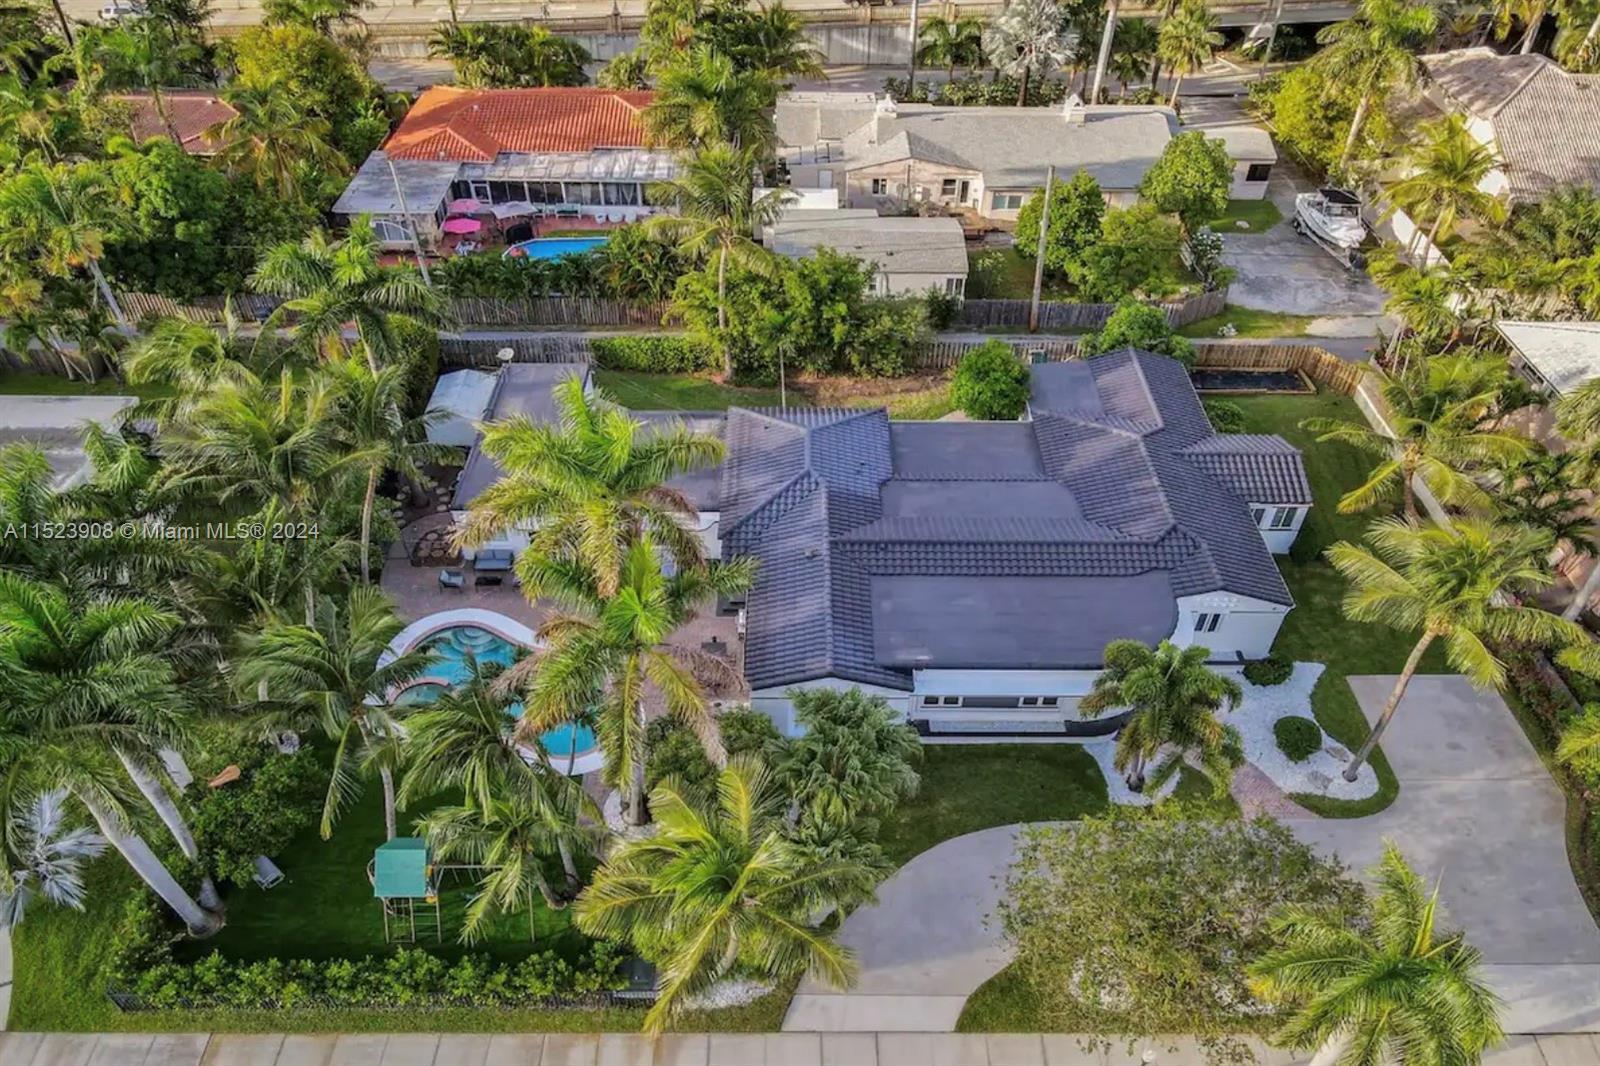 Over 4000sf of lliving space right next to the beach This beautiful estate home sits on an oversized